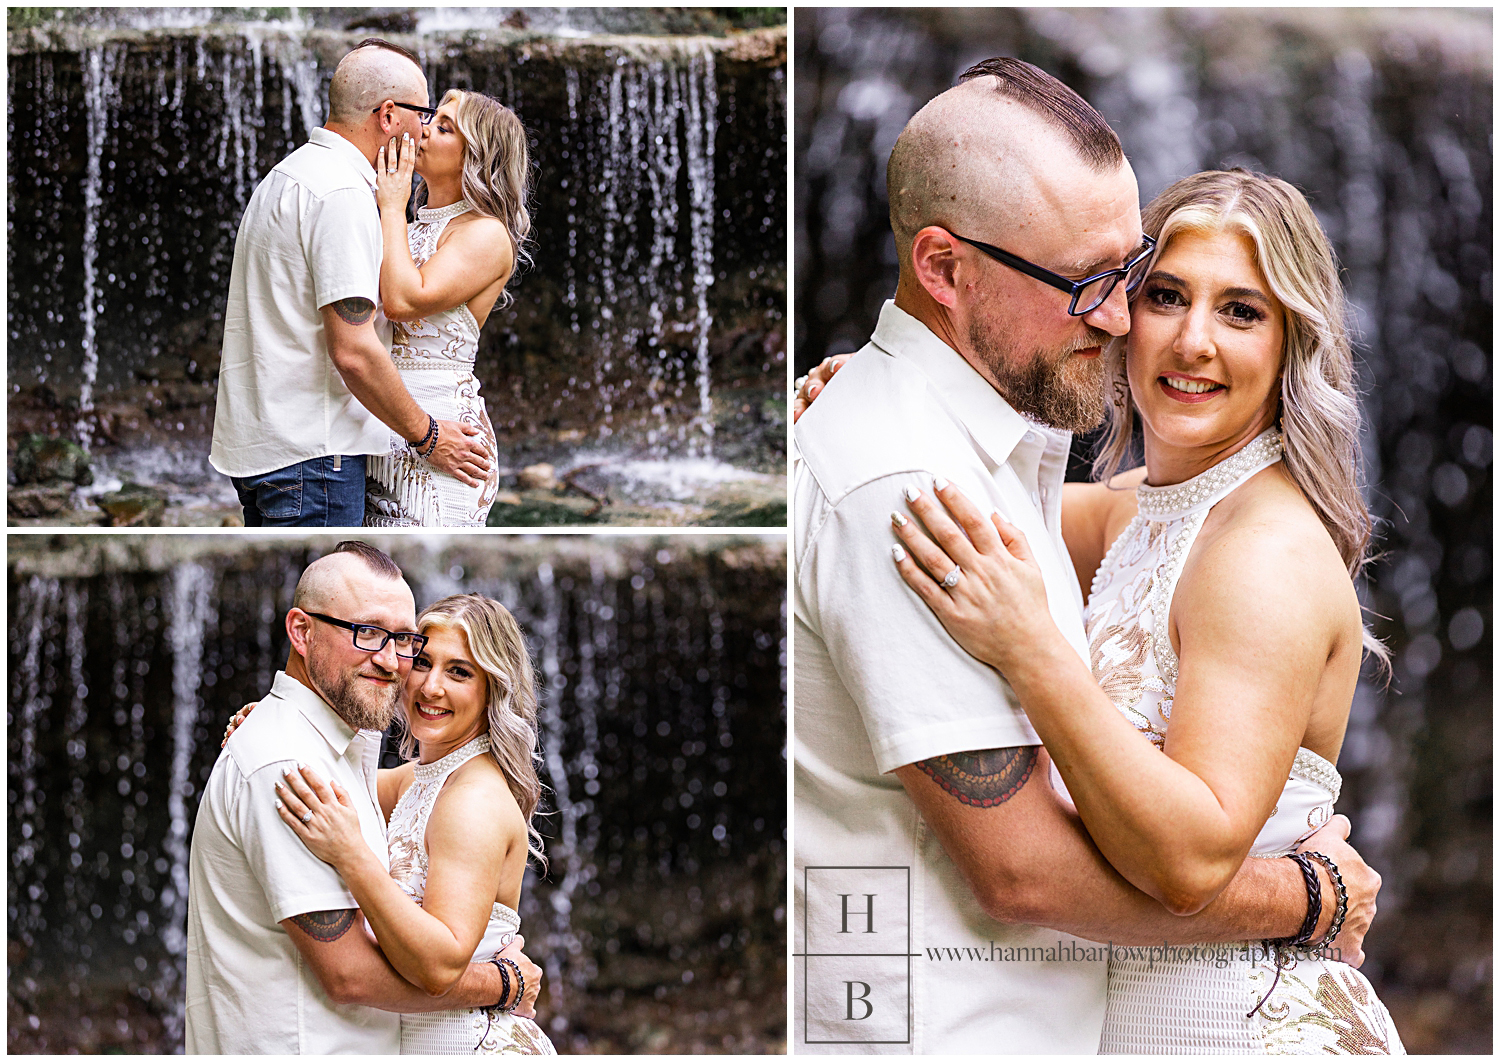 Couple poses by waterfall for engagement photos.